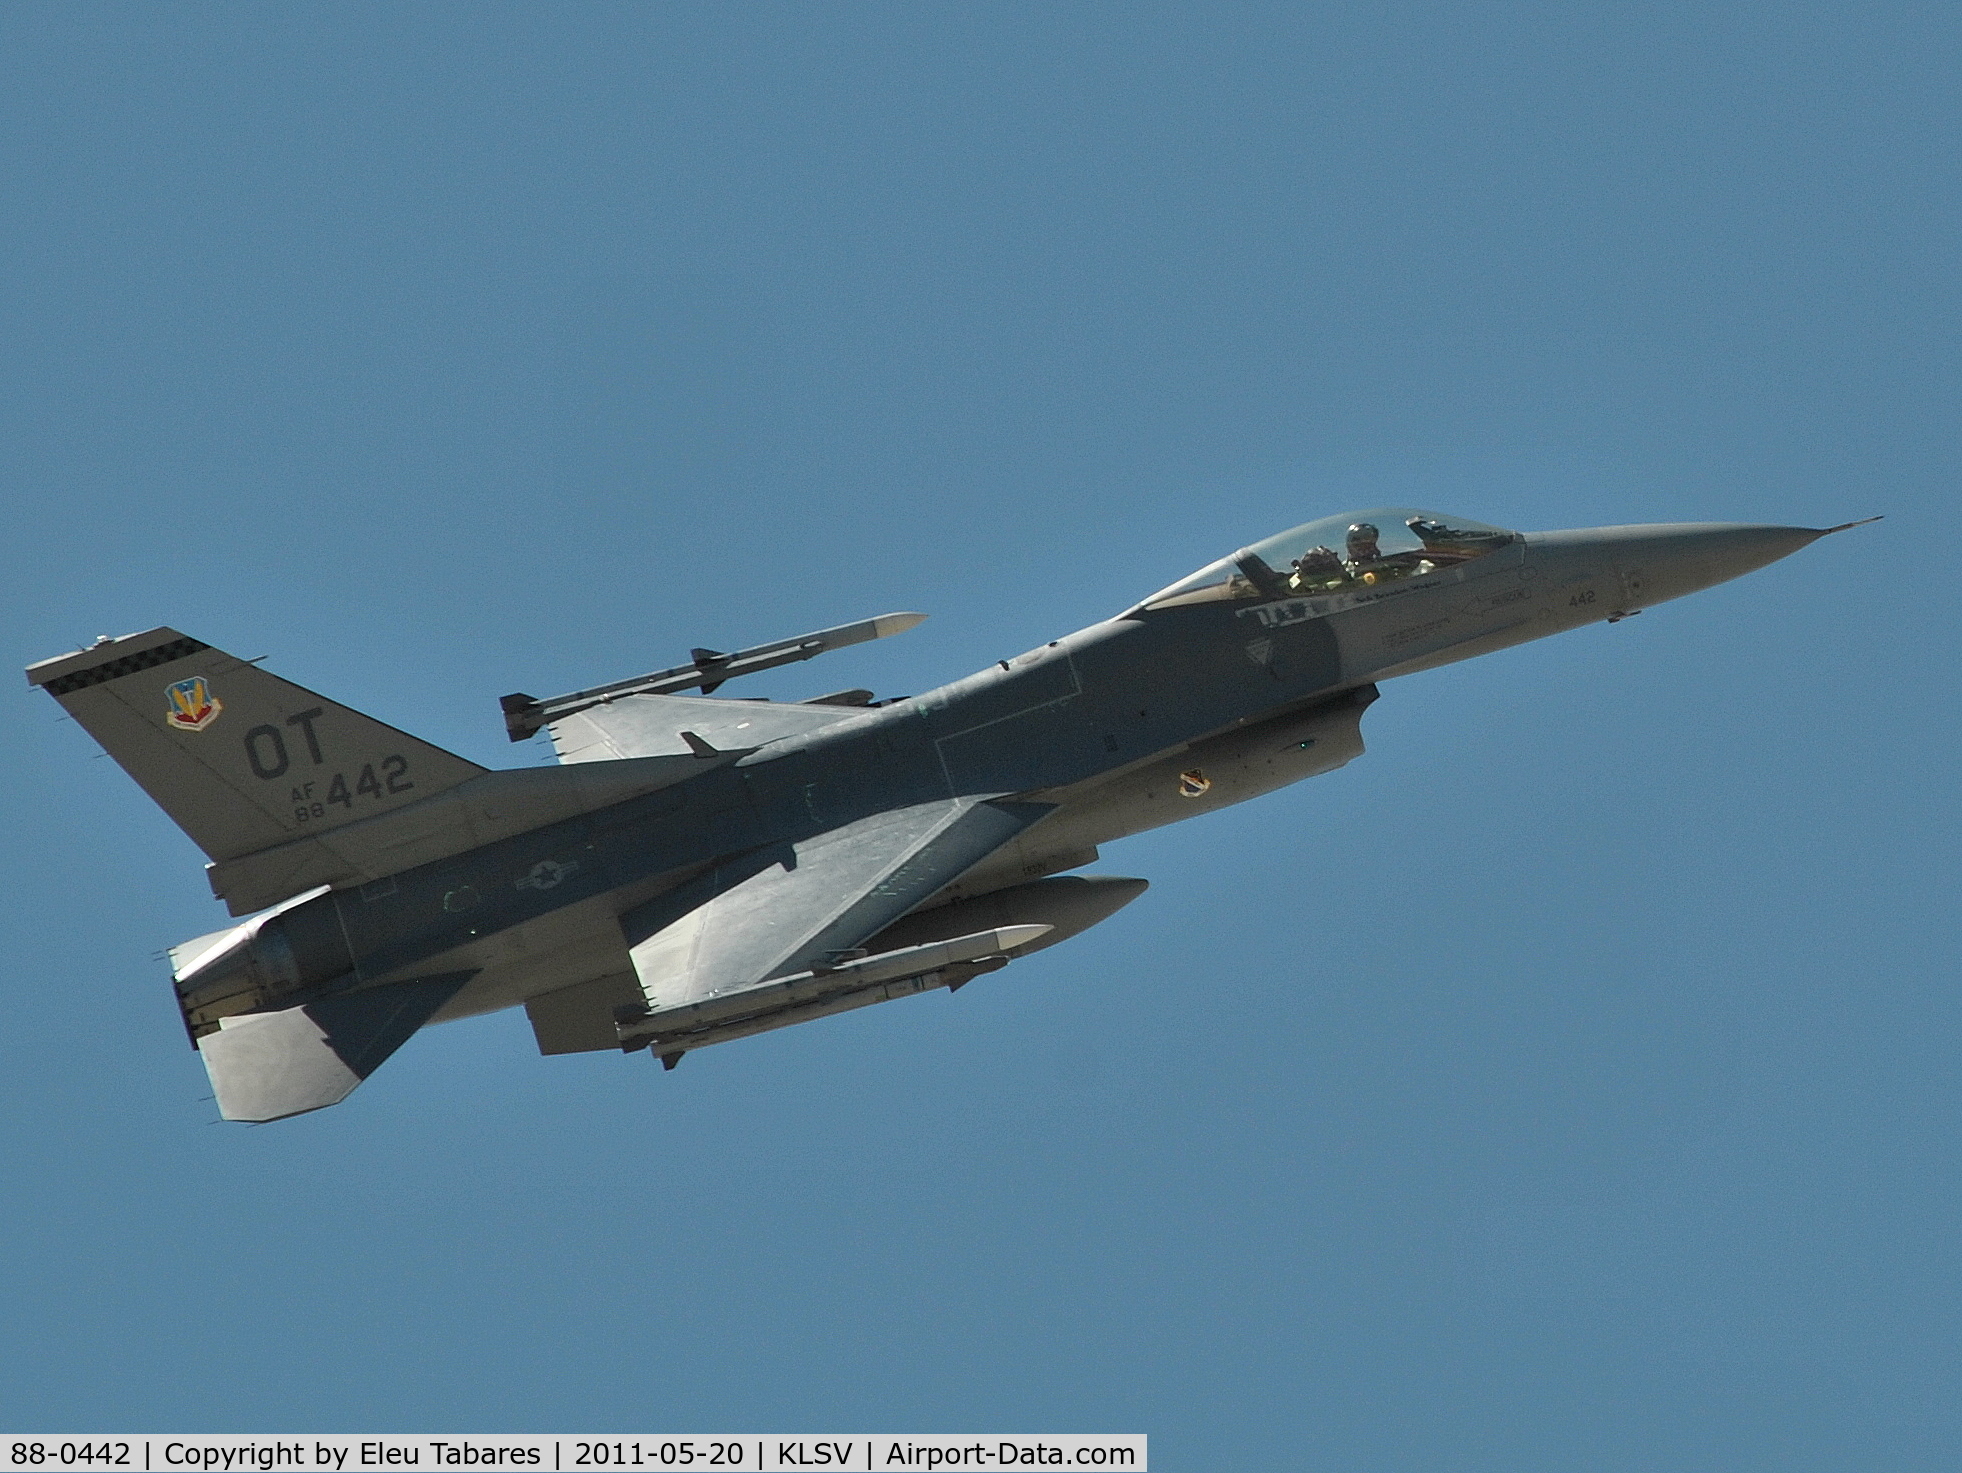 88-0442, General Dynamics F-16C Fighting Falcon C/N 5C-584, Taken during Green Flag Exercise at Nellis Air Force Base, Nevada.